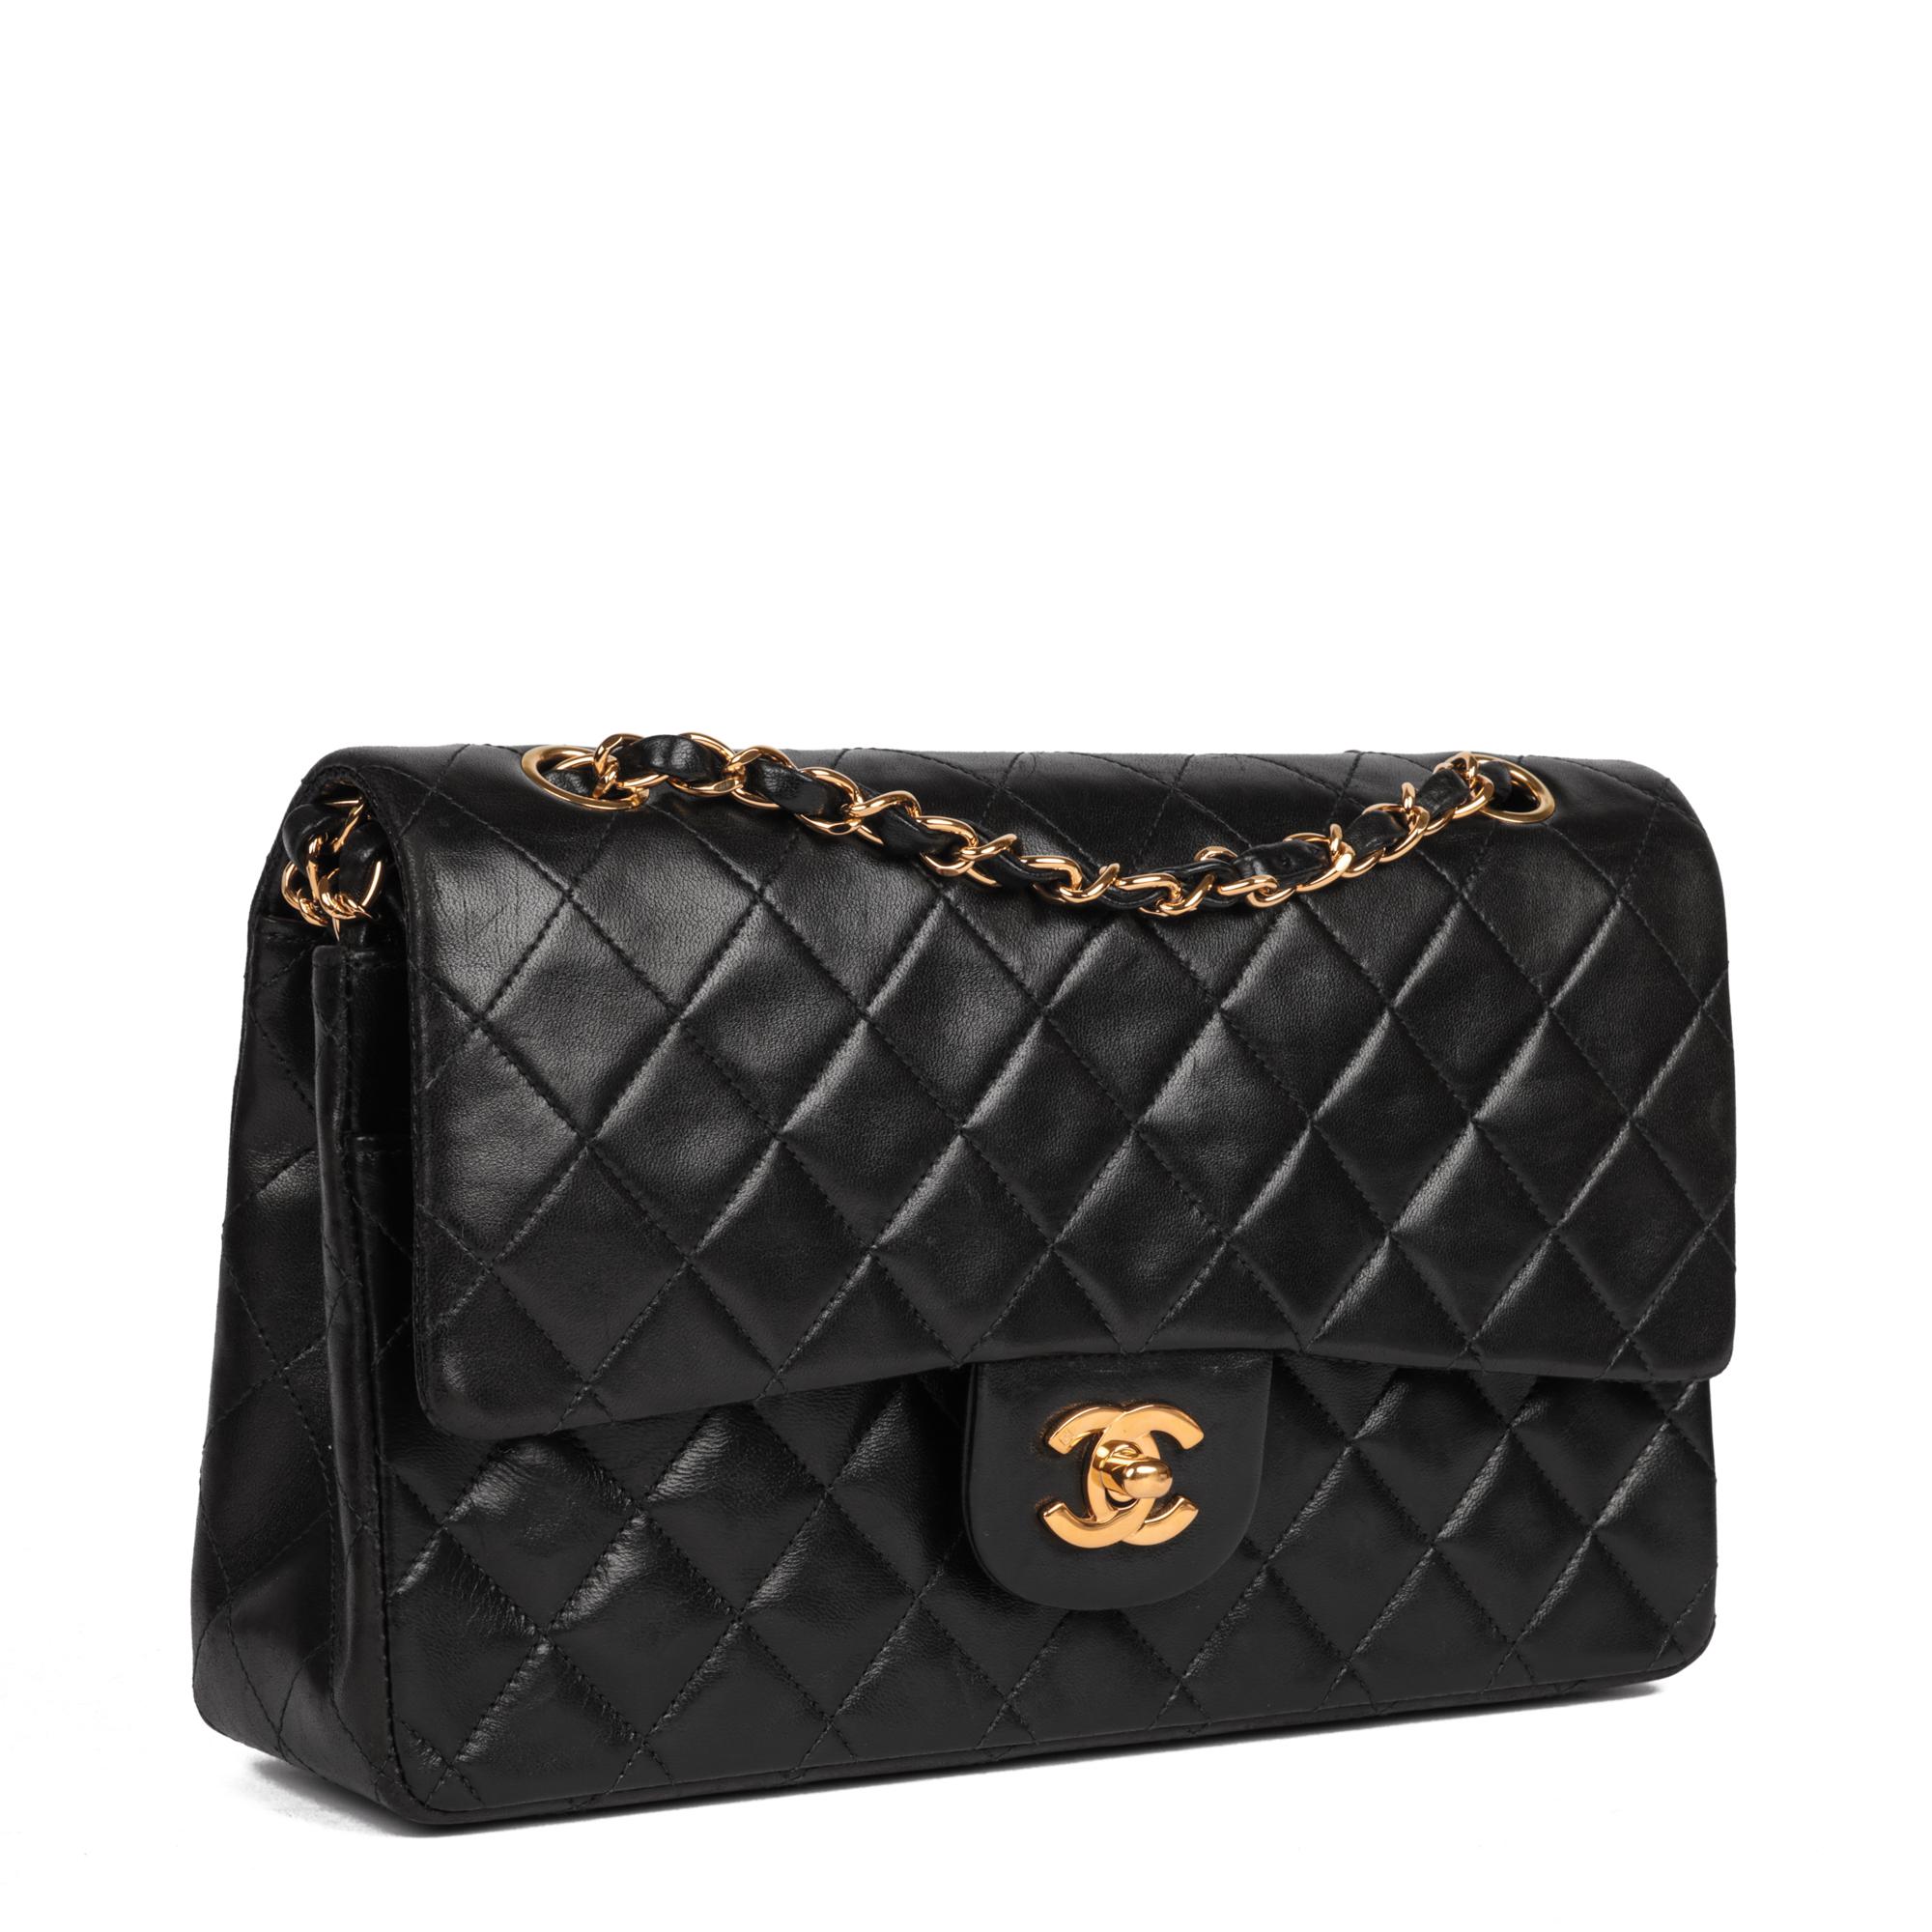 CHANEL
Black Quilted Lambskin Vintage Medium Classic Double Flap Bag

Xupes Reference: HB5190
Serial Number: 5153712
Age (Circa): 1997
Accompanied By: Chanel Dust Bag, Care Booklet, Authenticity Card
Authenticity Details: Authenticity Card, Serial